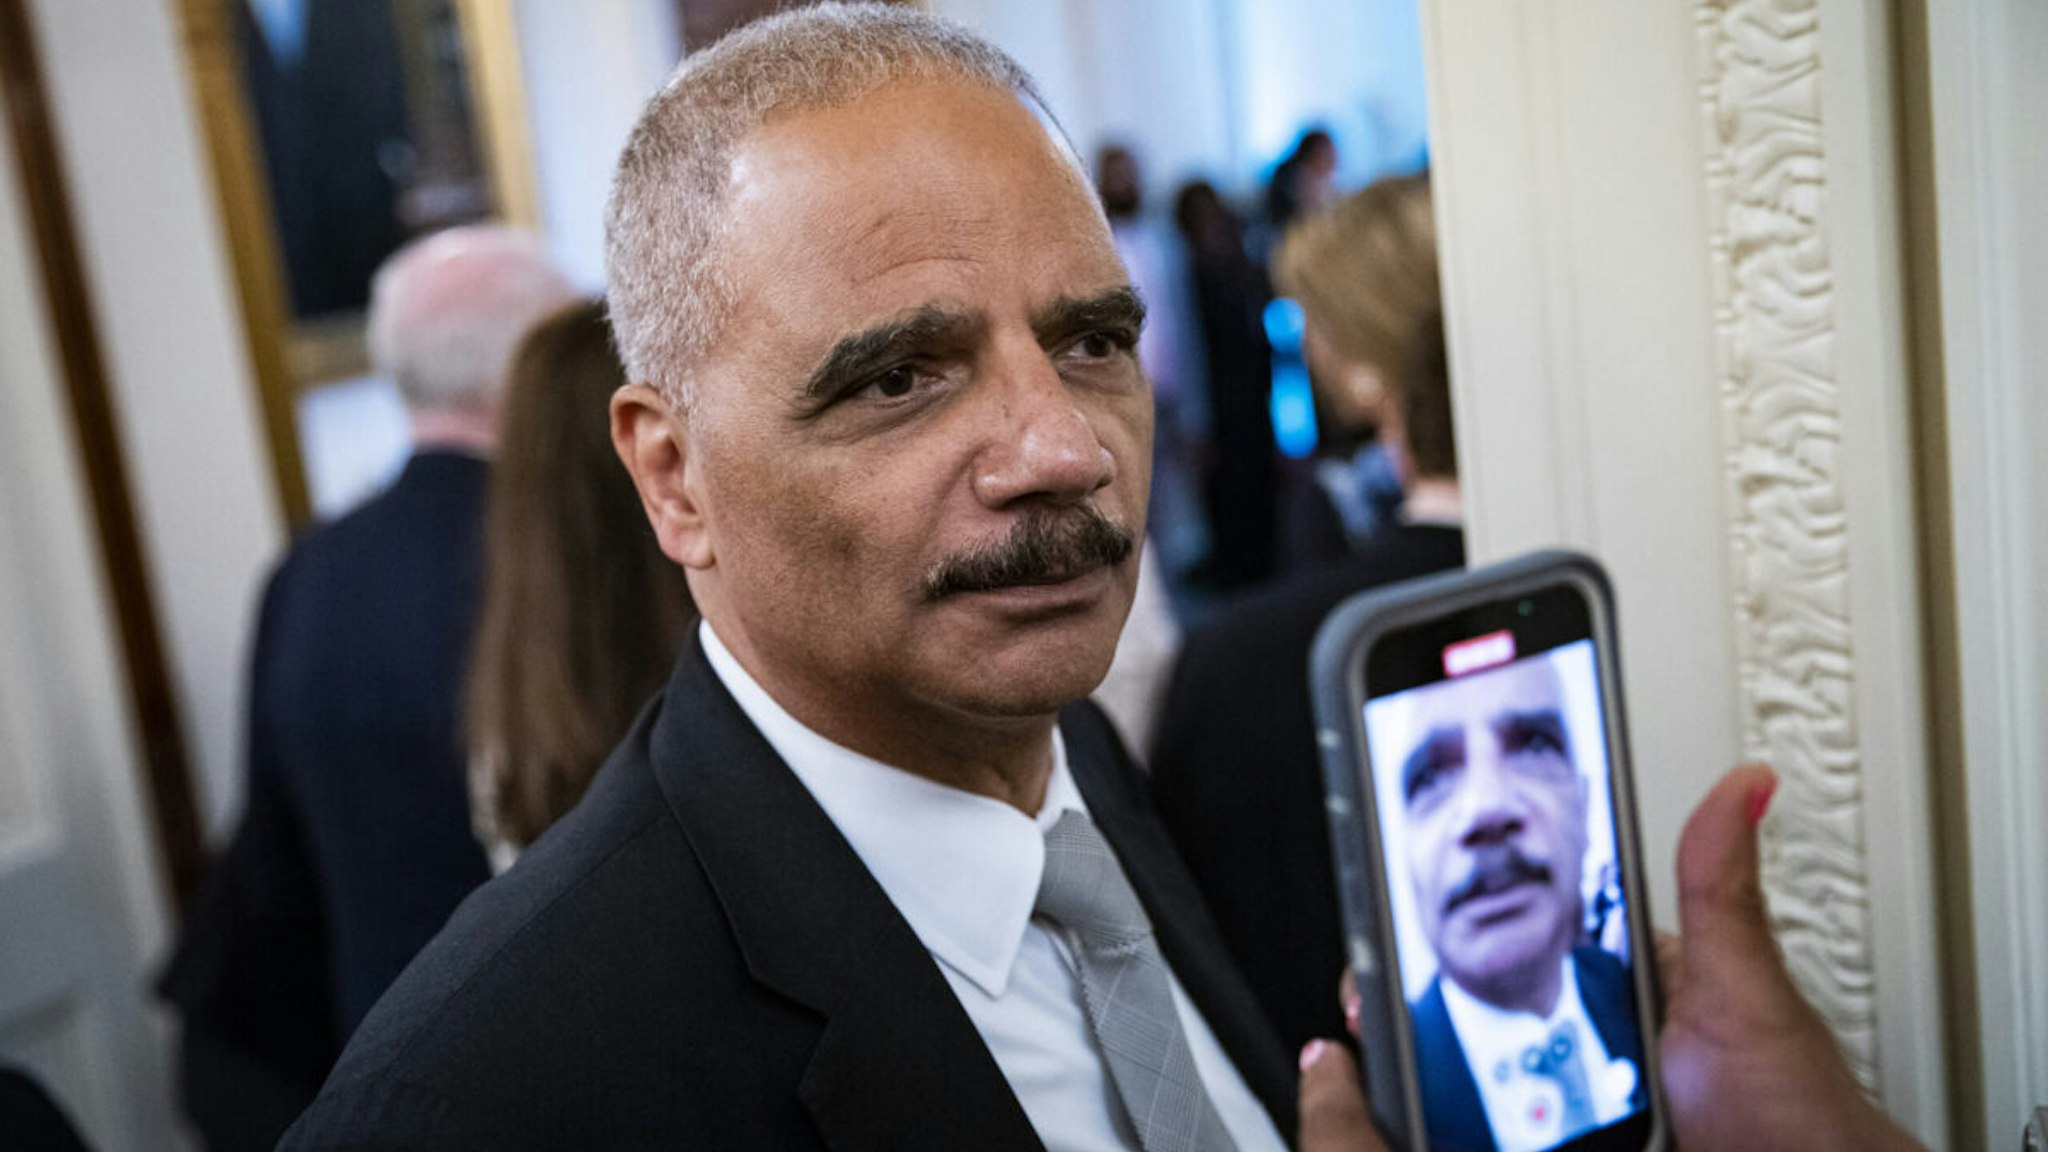 Eric Holder, former US attorney general, following a ceremony with former US President Barack Obama and former First Lady Michelle Obama for the unveiling of their official White House portraits in Washington, D.C., US, on Wednesday, Sept. 7, 2022.